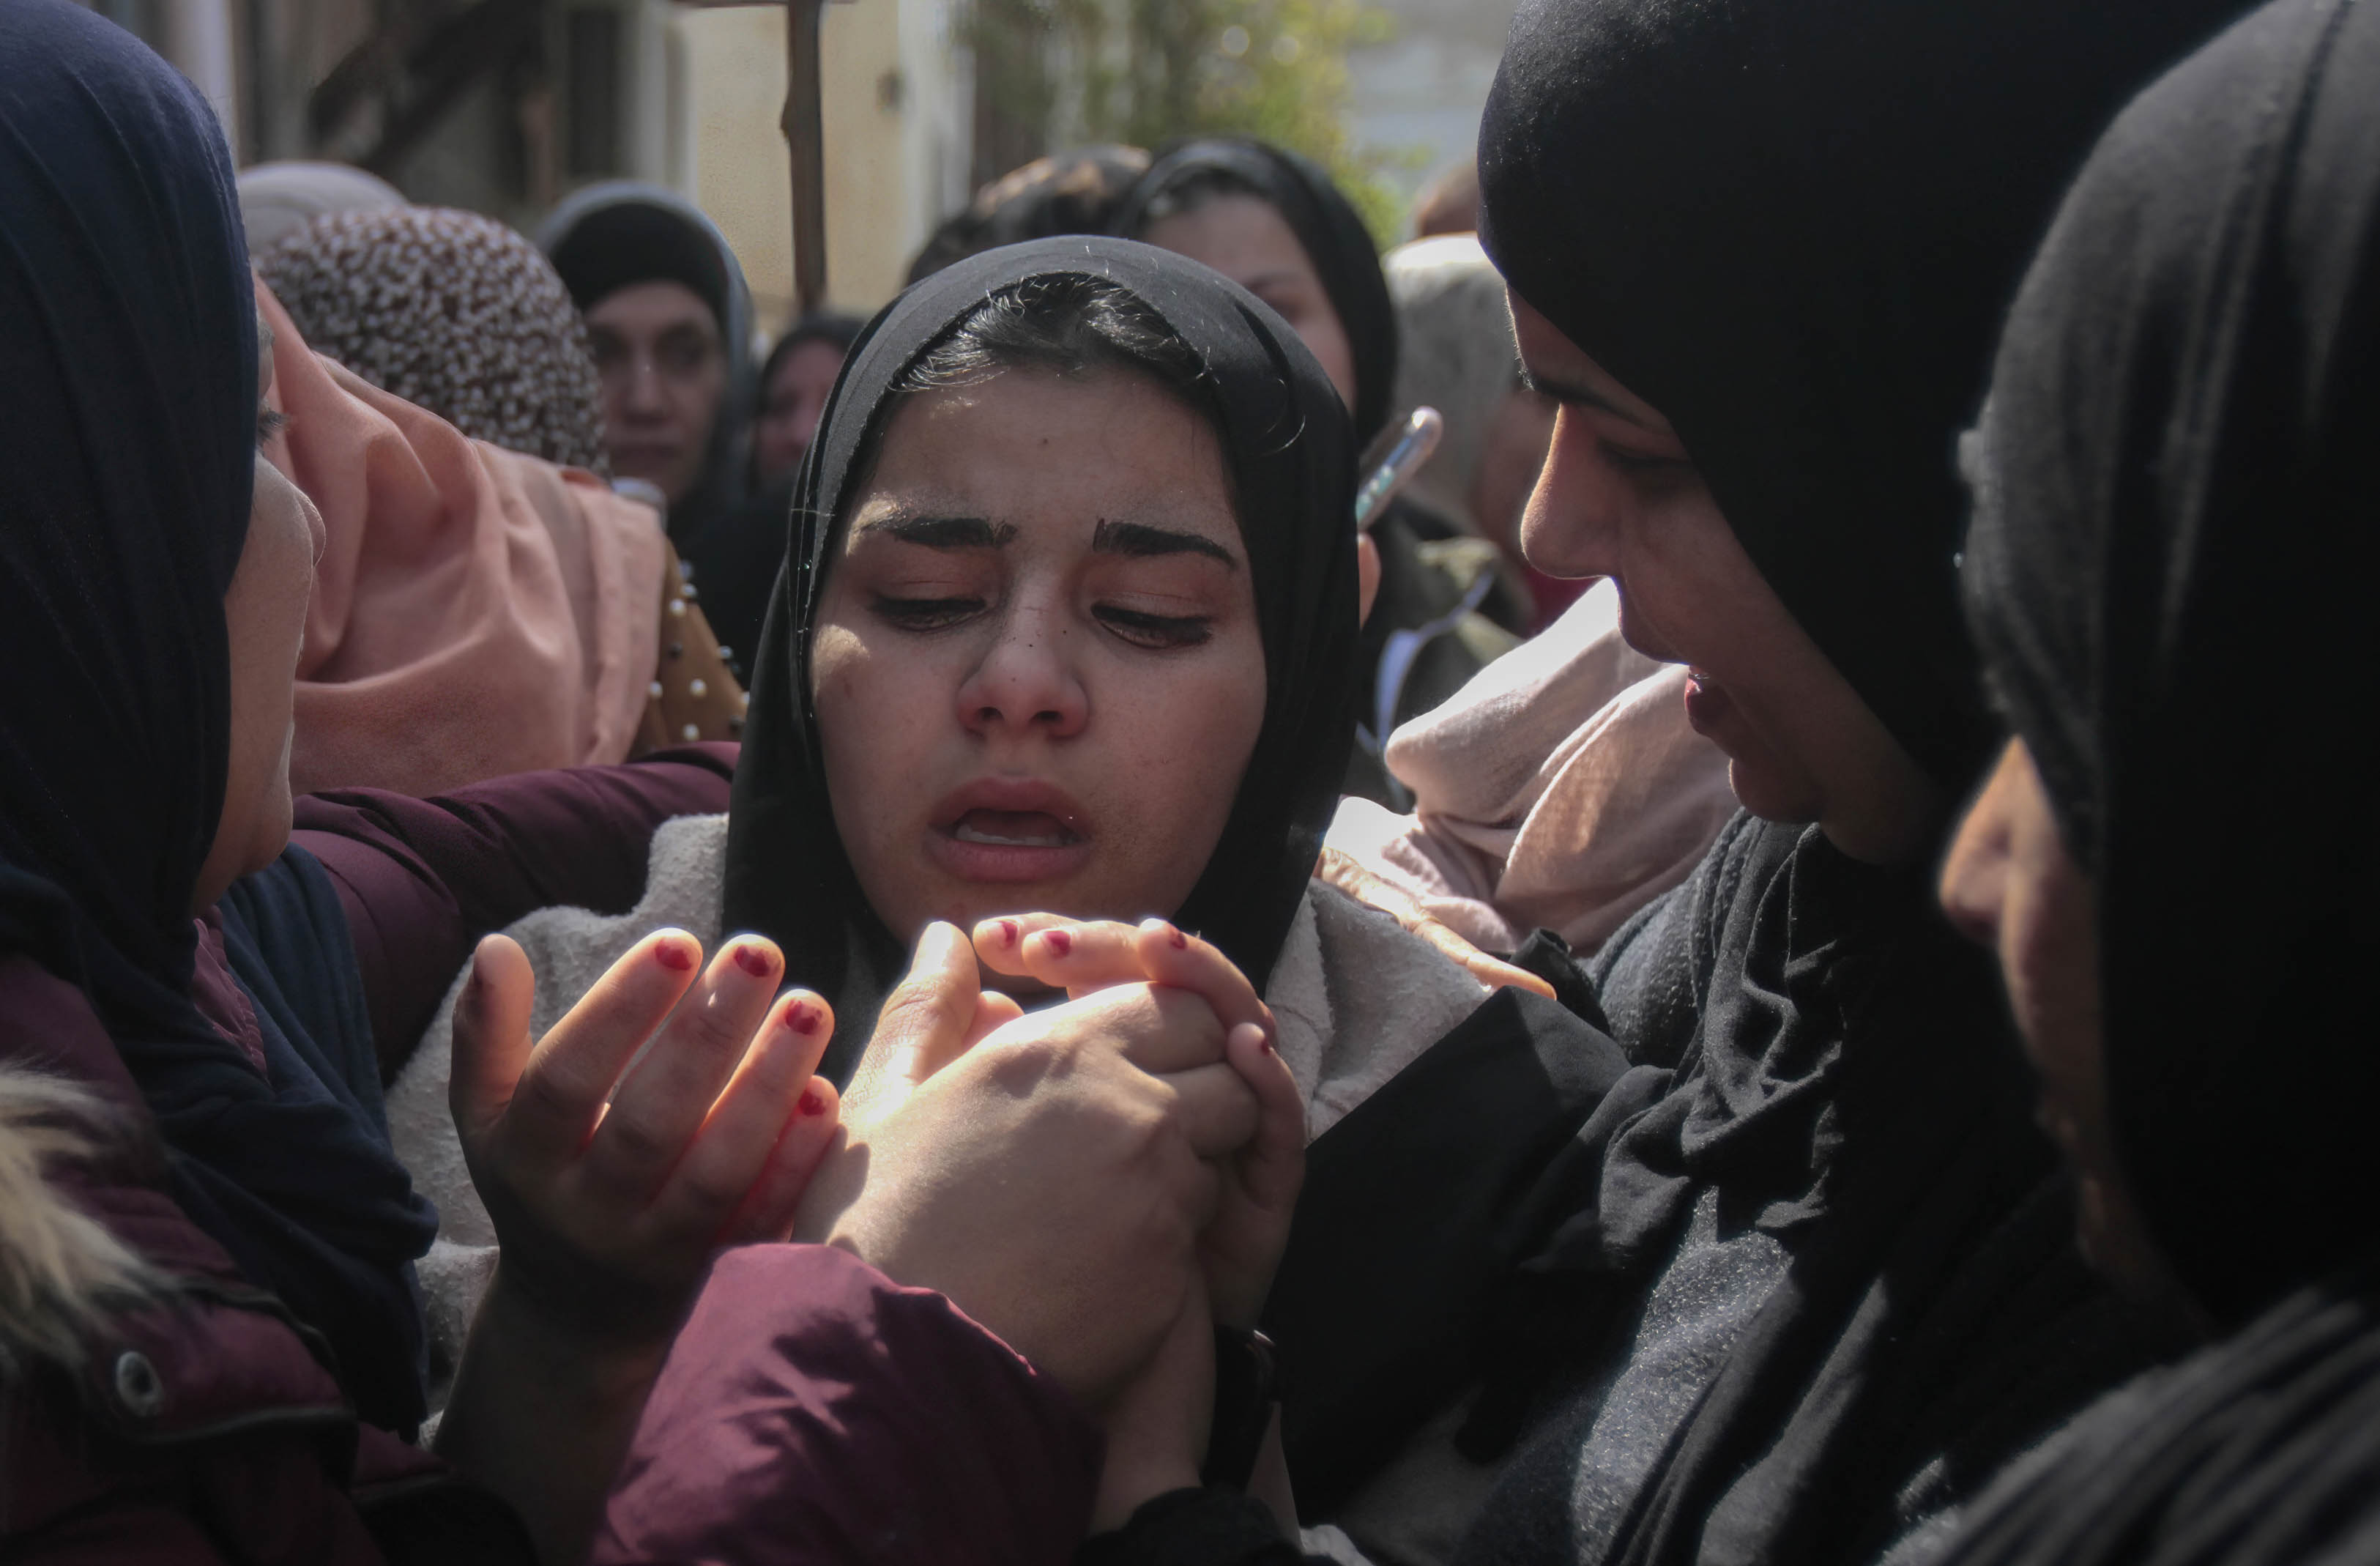 Sanad's sister Hadeel Abu Attia, 15, mourn her him during the funeral. (Reuters)